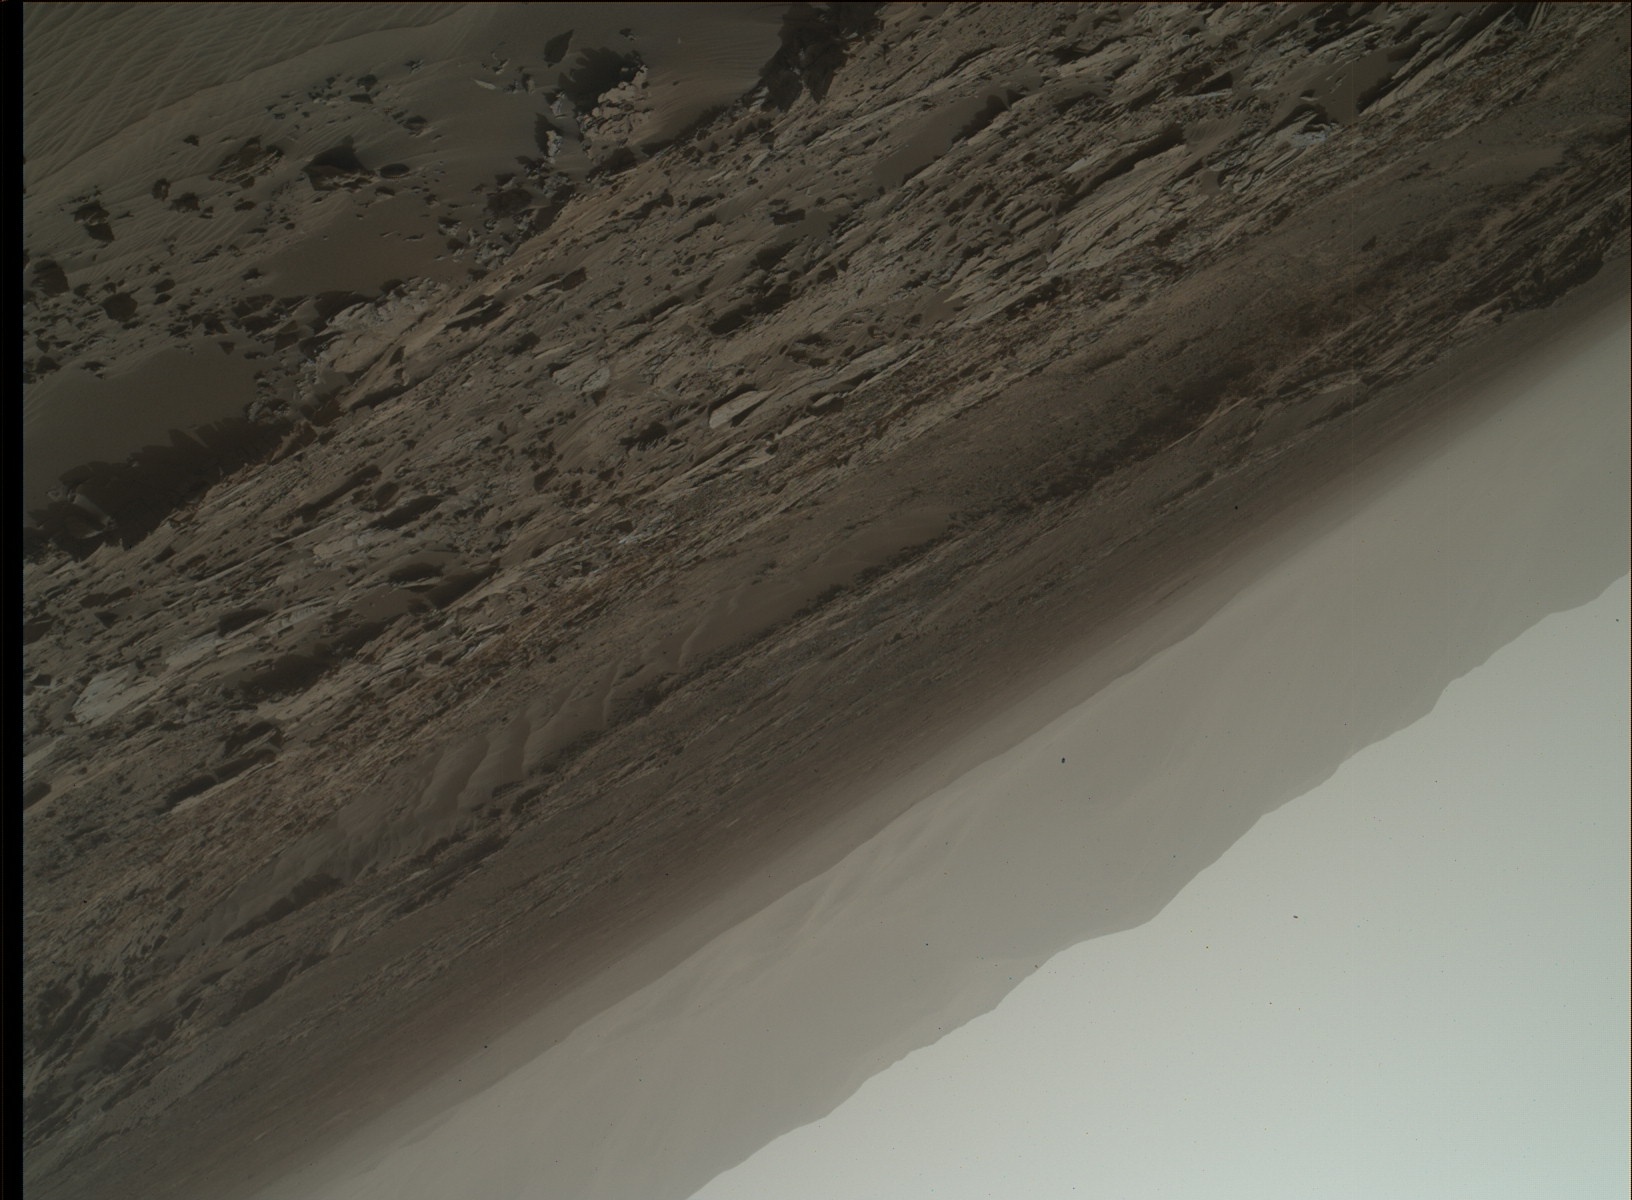 Nasa's Mars rover Curiosity acquired this image using its Mars Hand Lens Imager (MAHLI) on Sol 1110